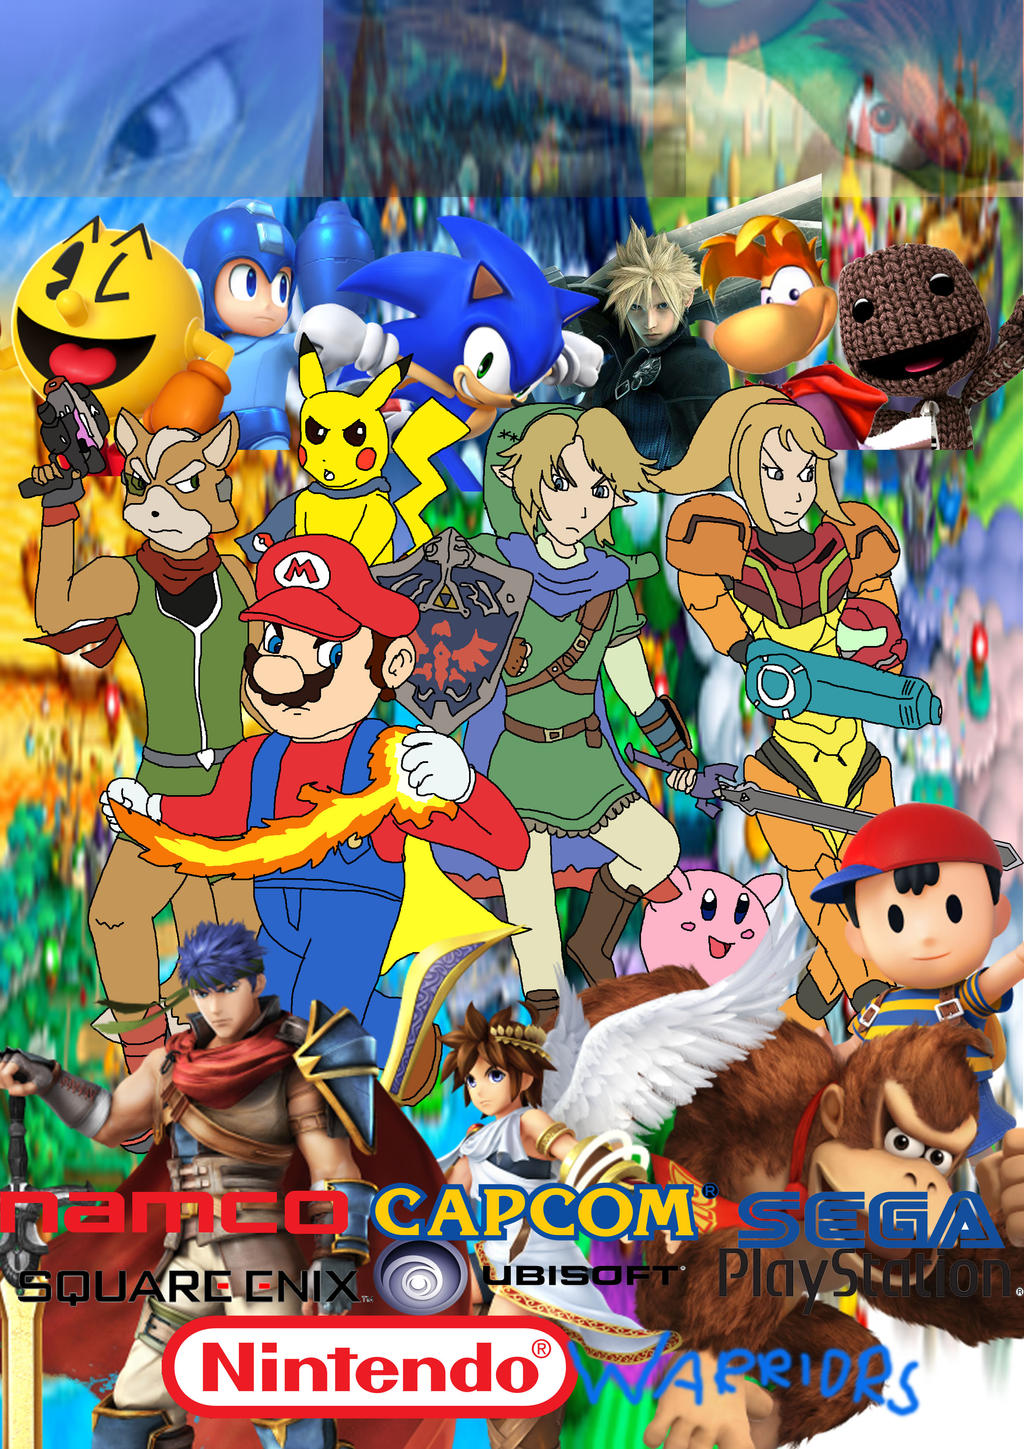 PlayStation One Games Poster by MrYoshi1996 on DeviantArt